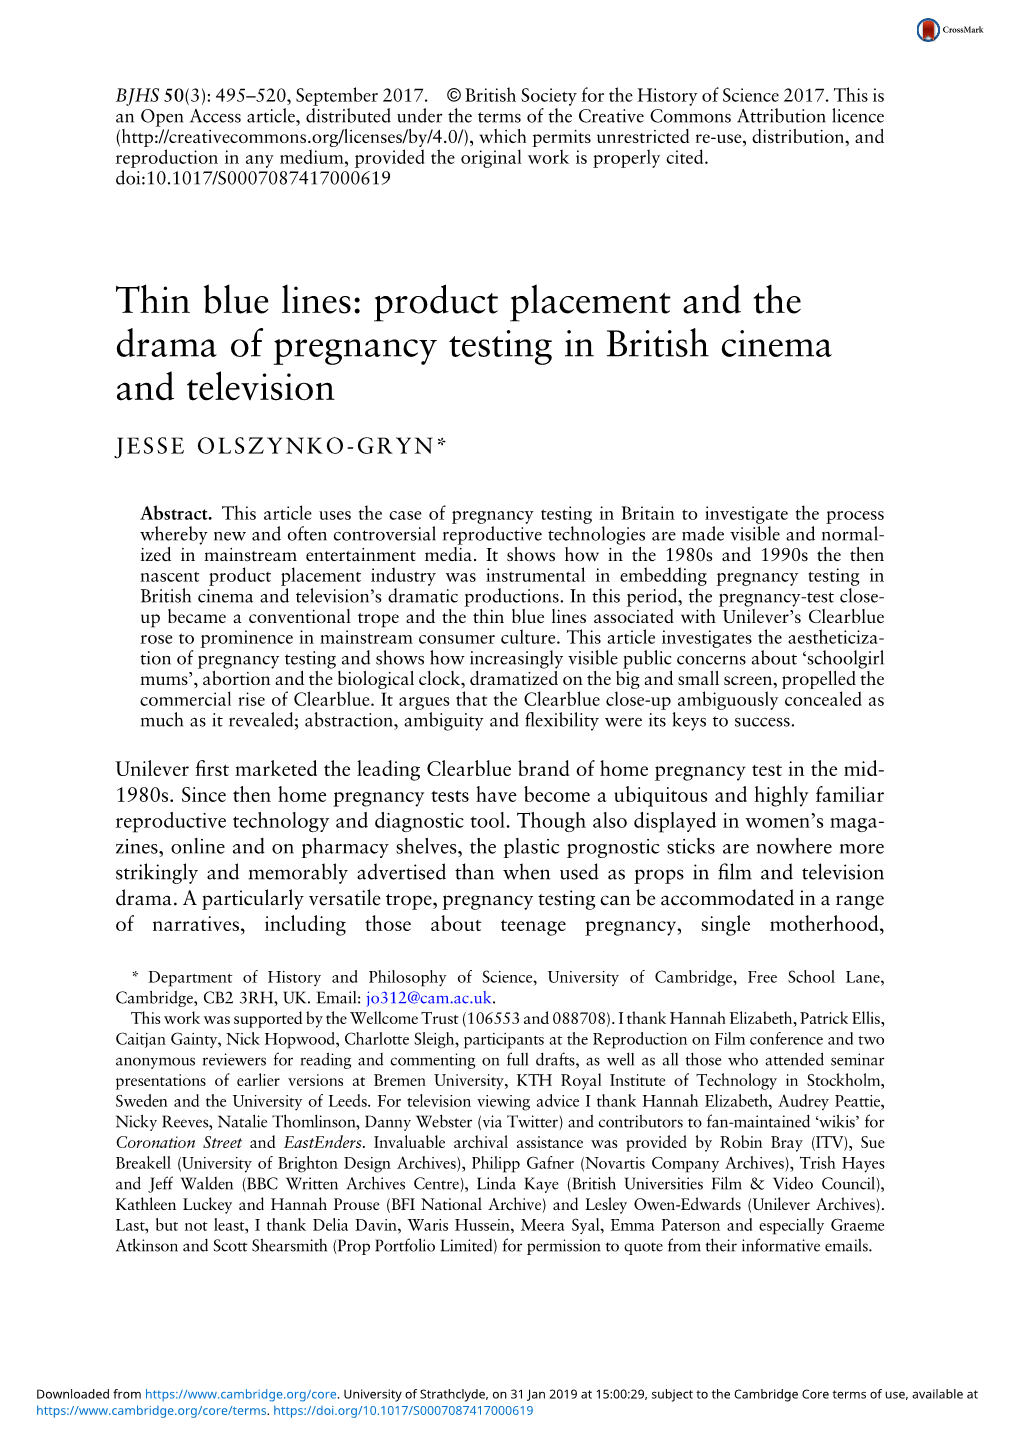 Thin Blue Lines: Product Placement and the Drama of Pregnancy Testing in British Cinema and Television